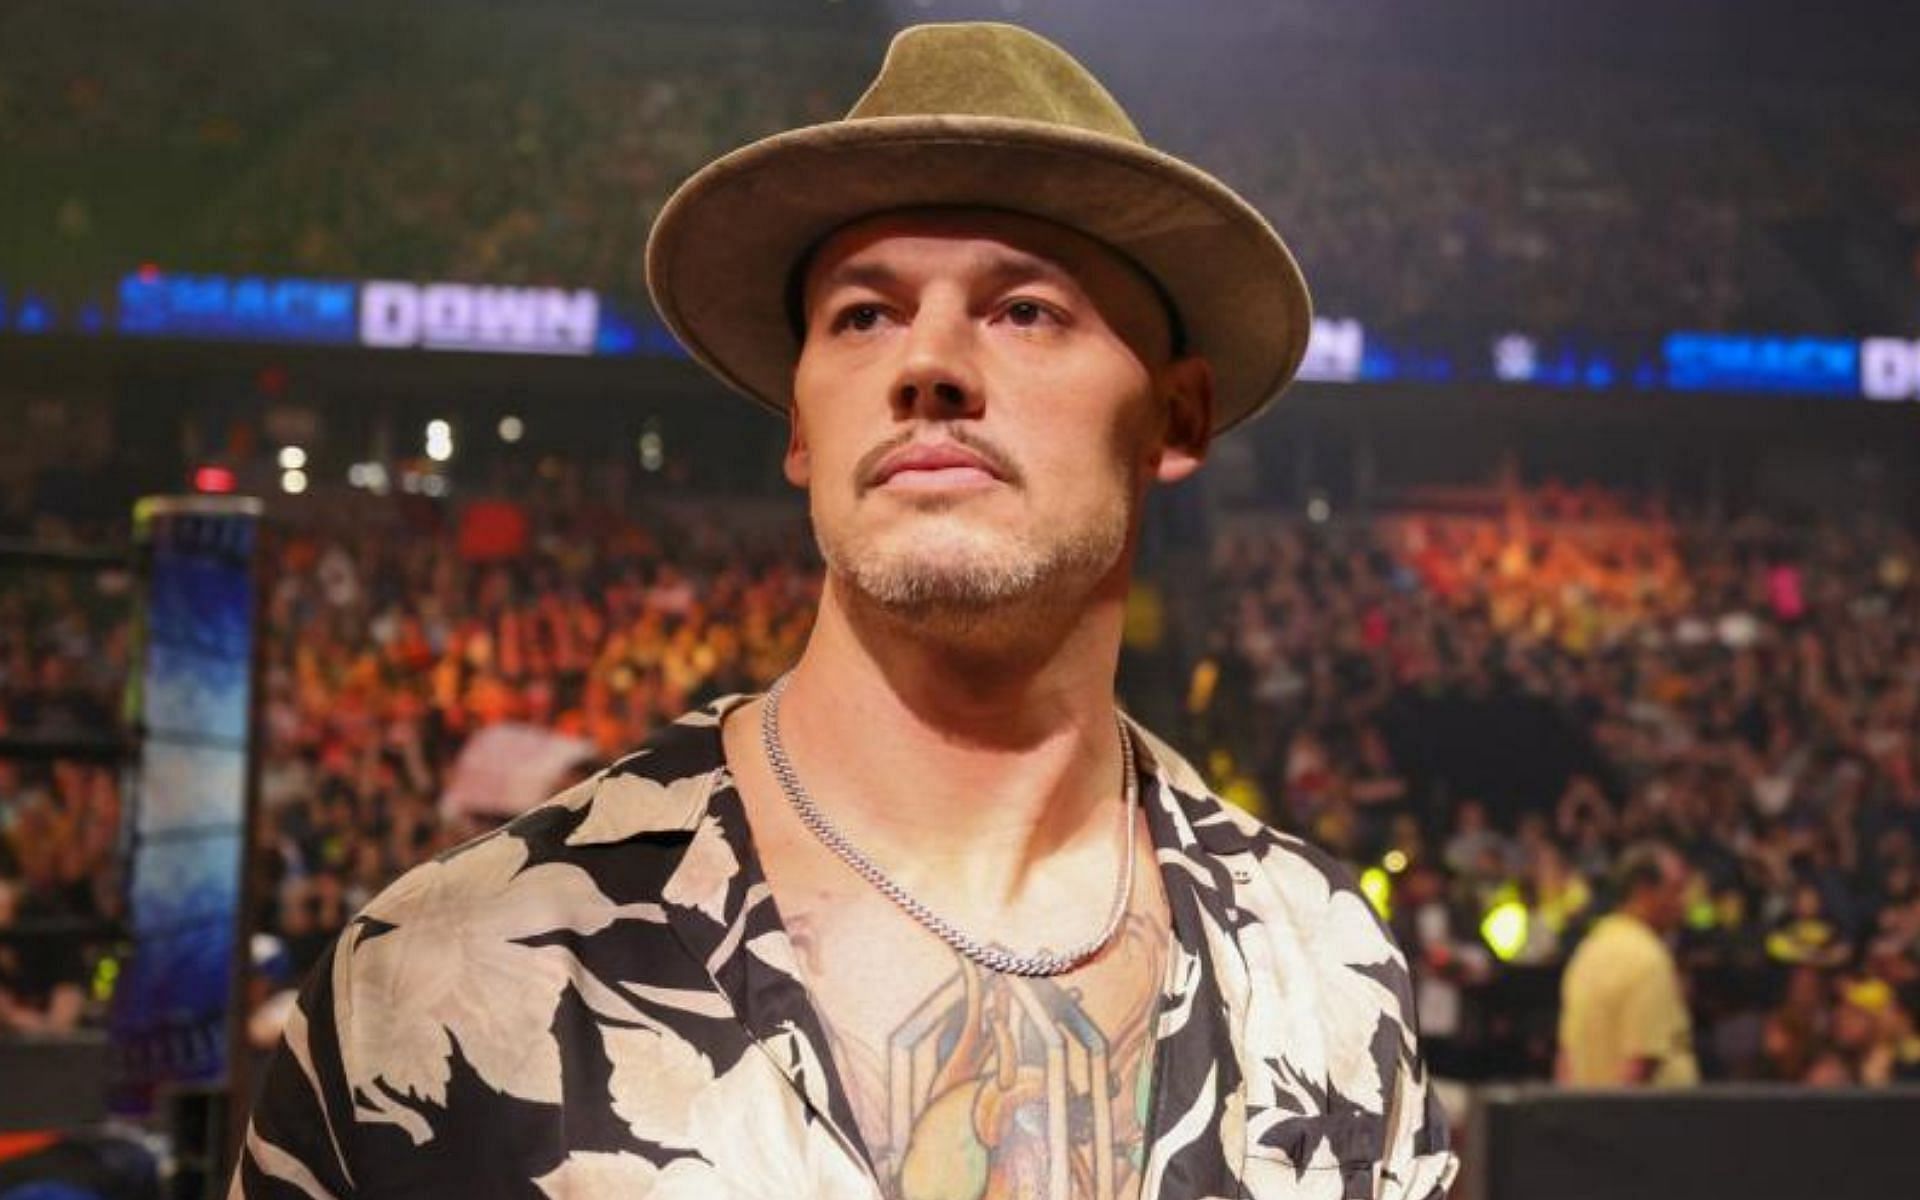 Baron Corbin is now managed by JBL